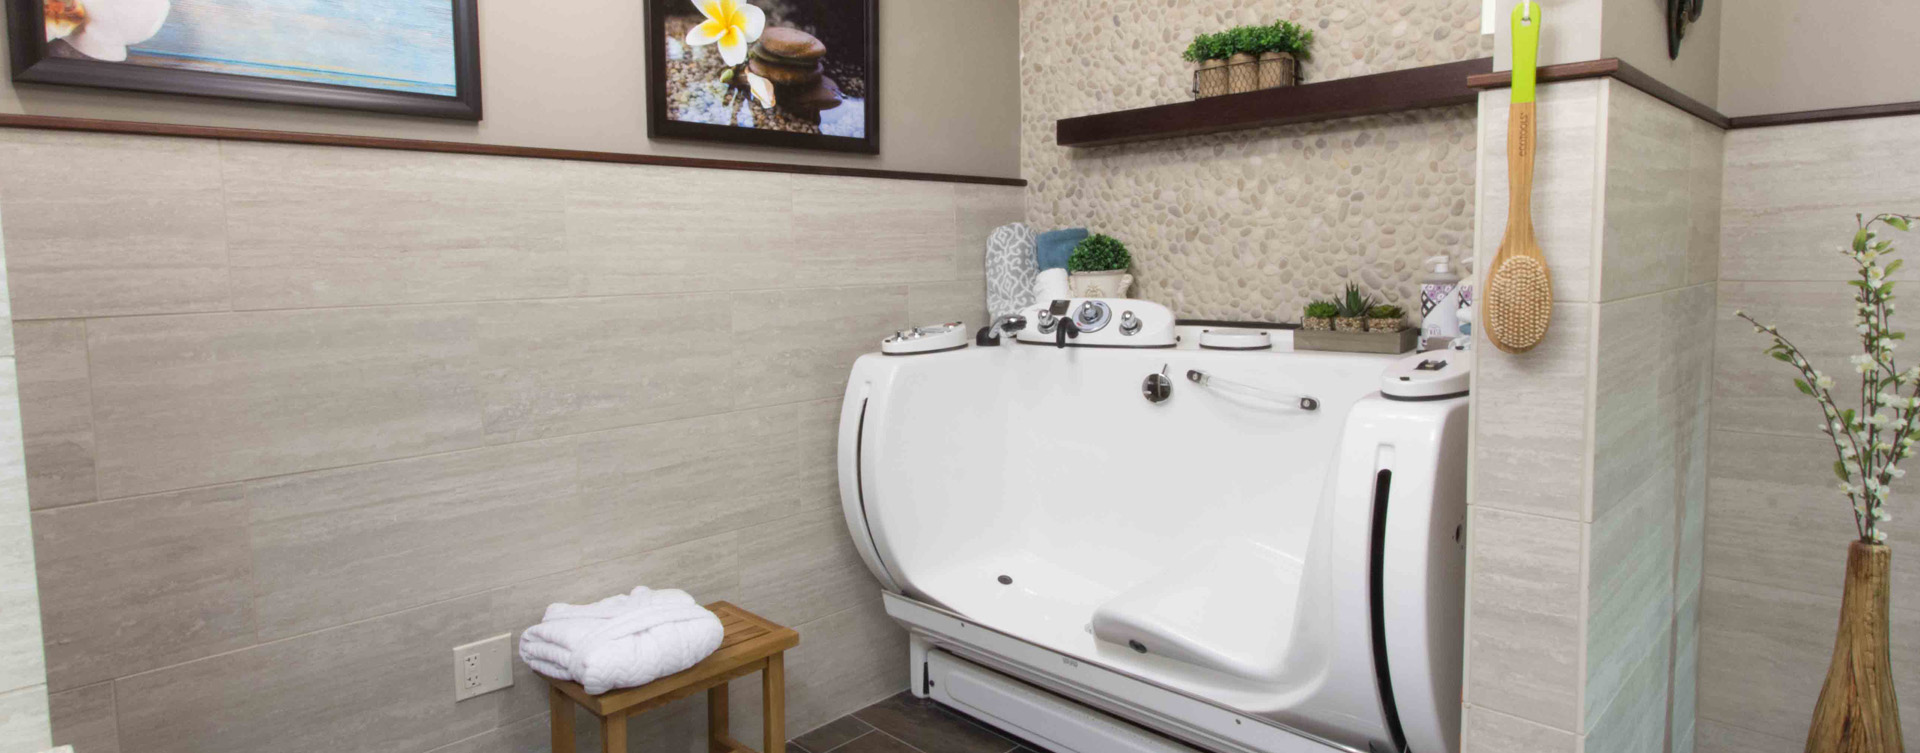 Our whirlpool bathtub creates a spa-like environment tailored to enhance your relaxation and enjoyment at Bickford of Gurnee